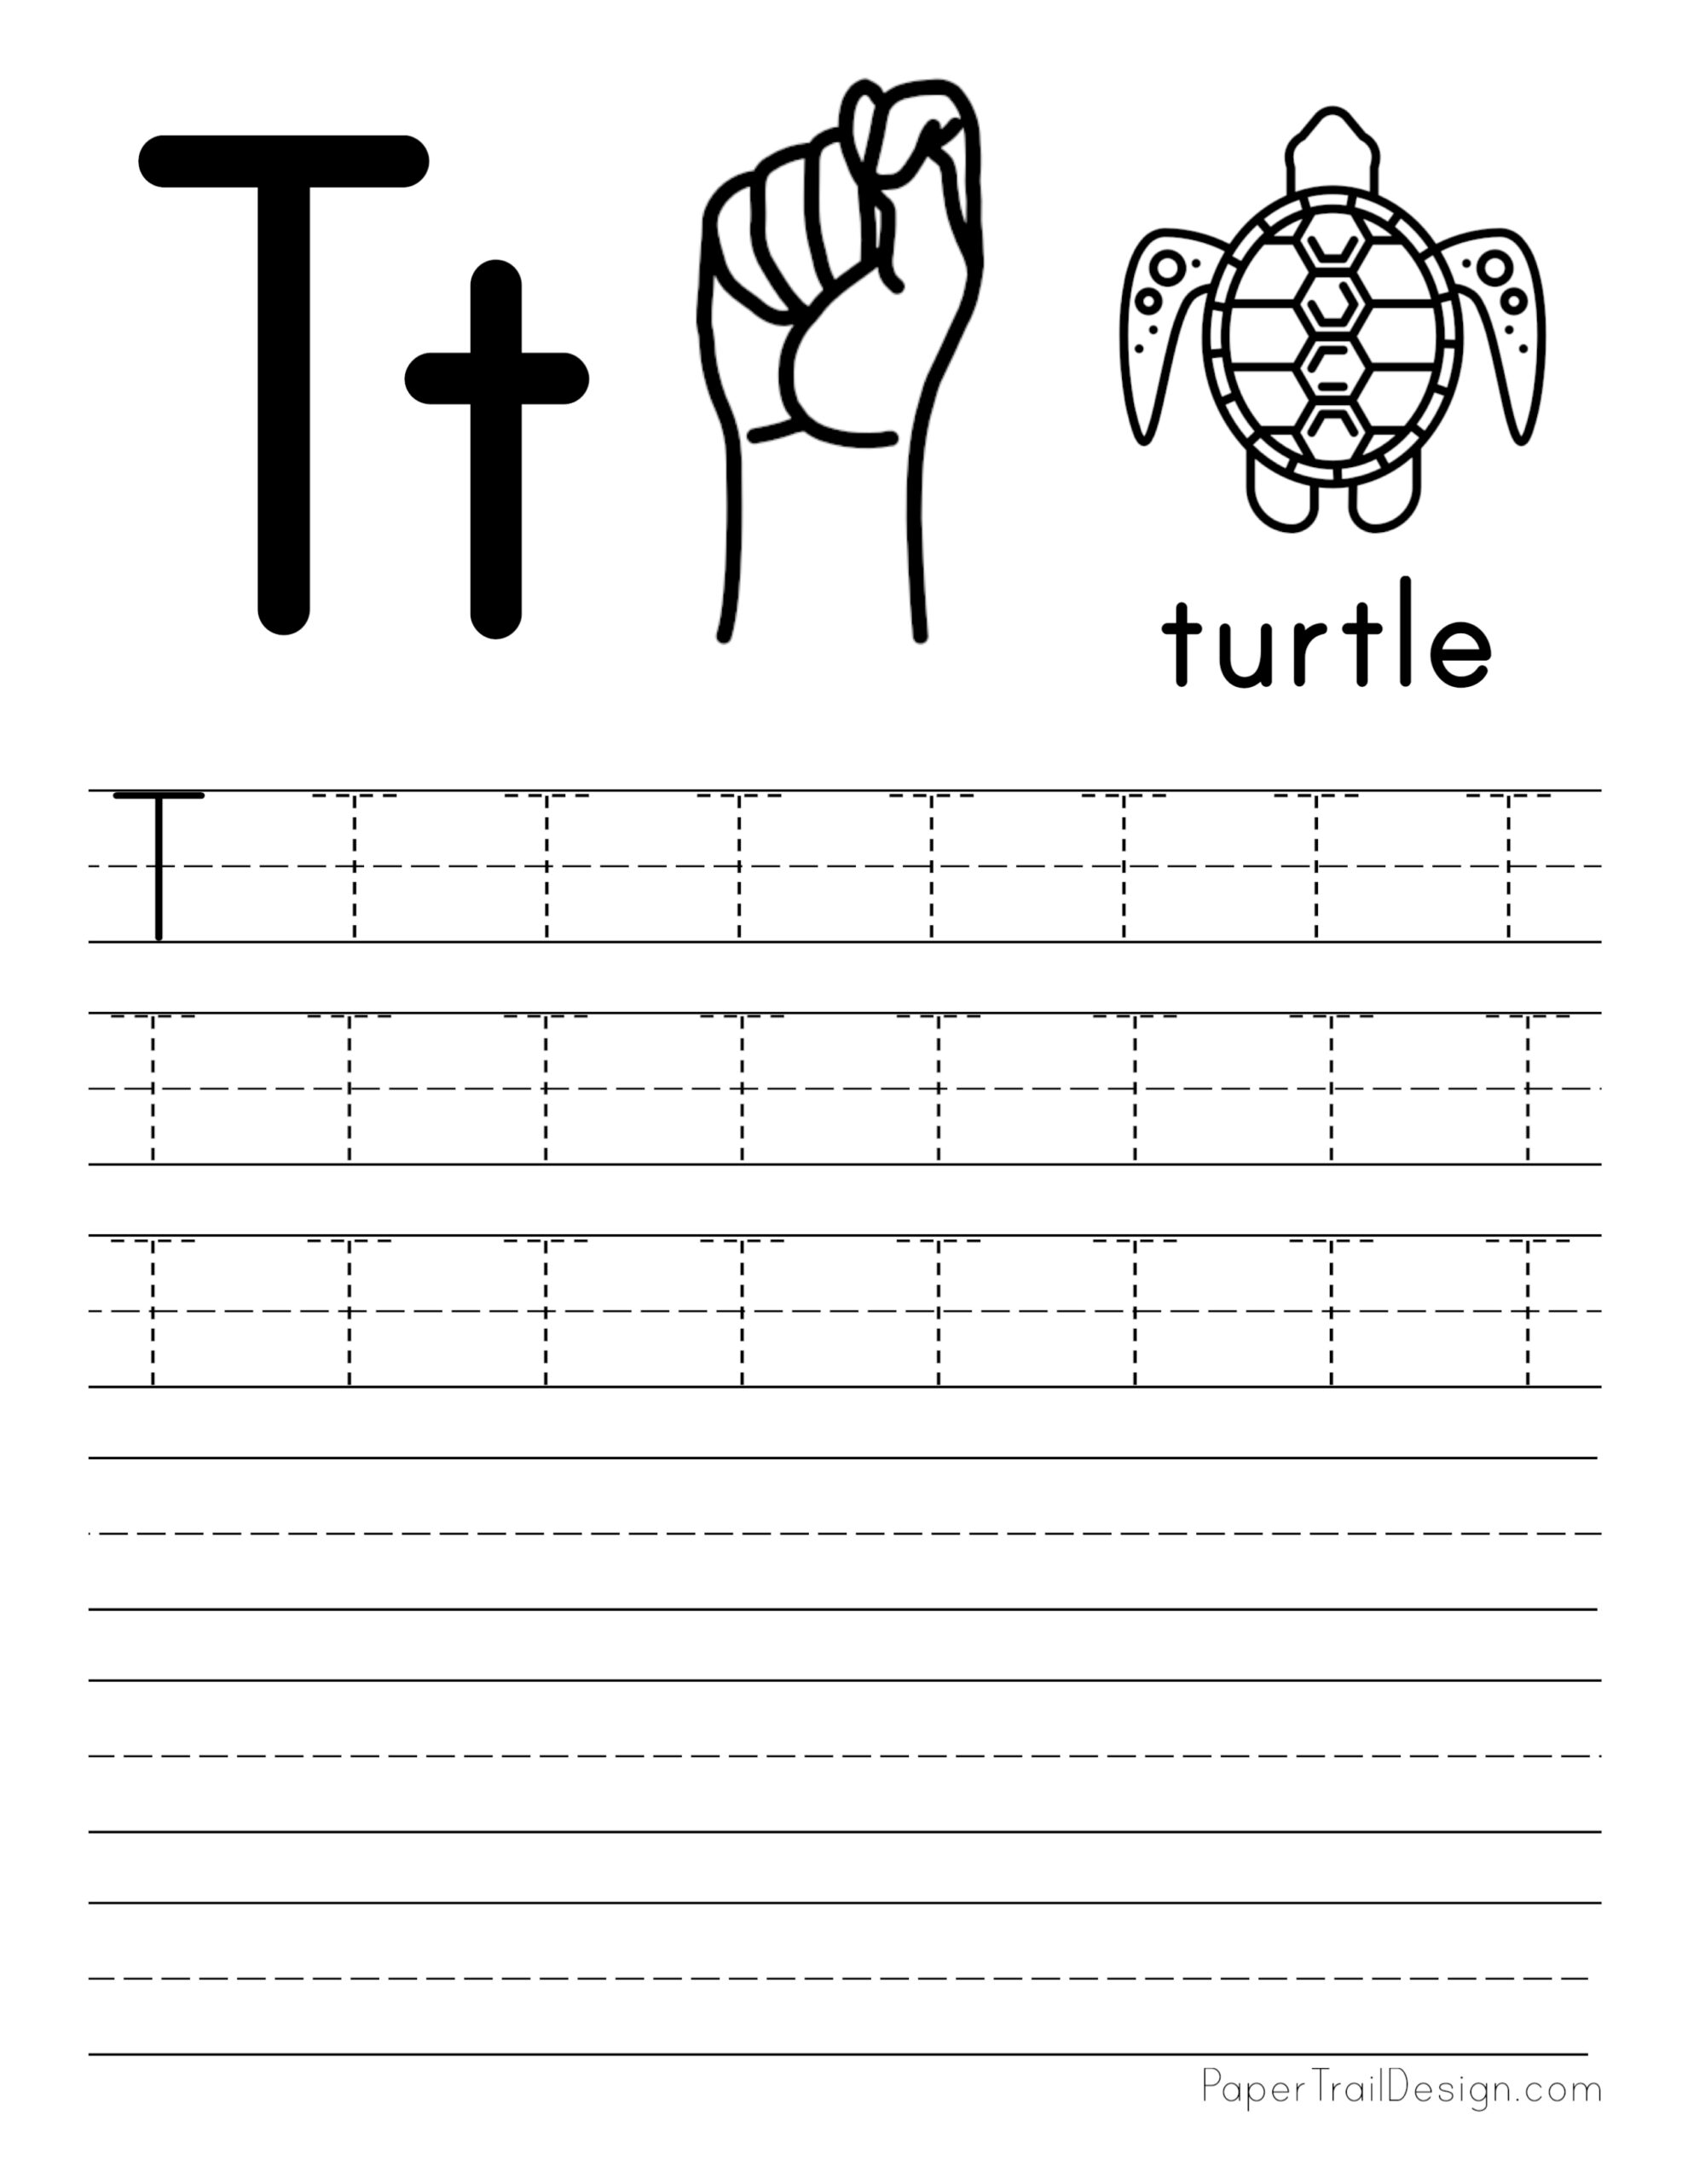 free-letter-tracing-worksheets-paper-trail-design